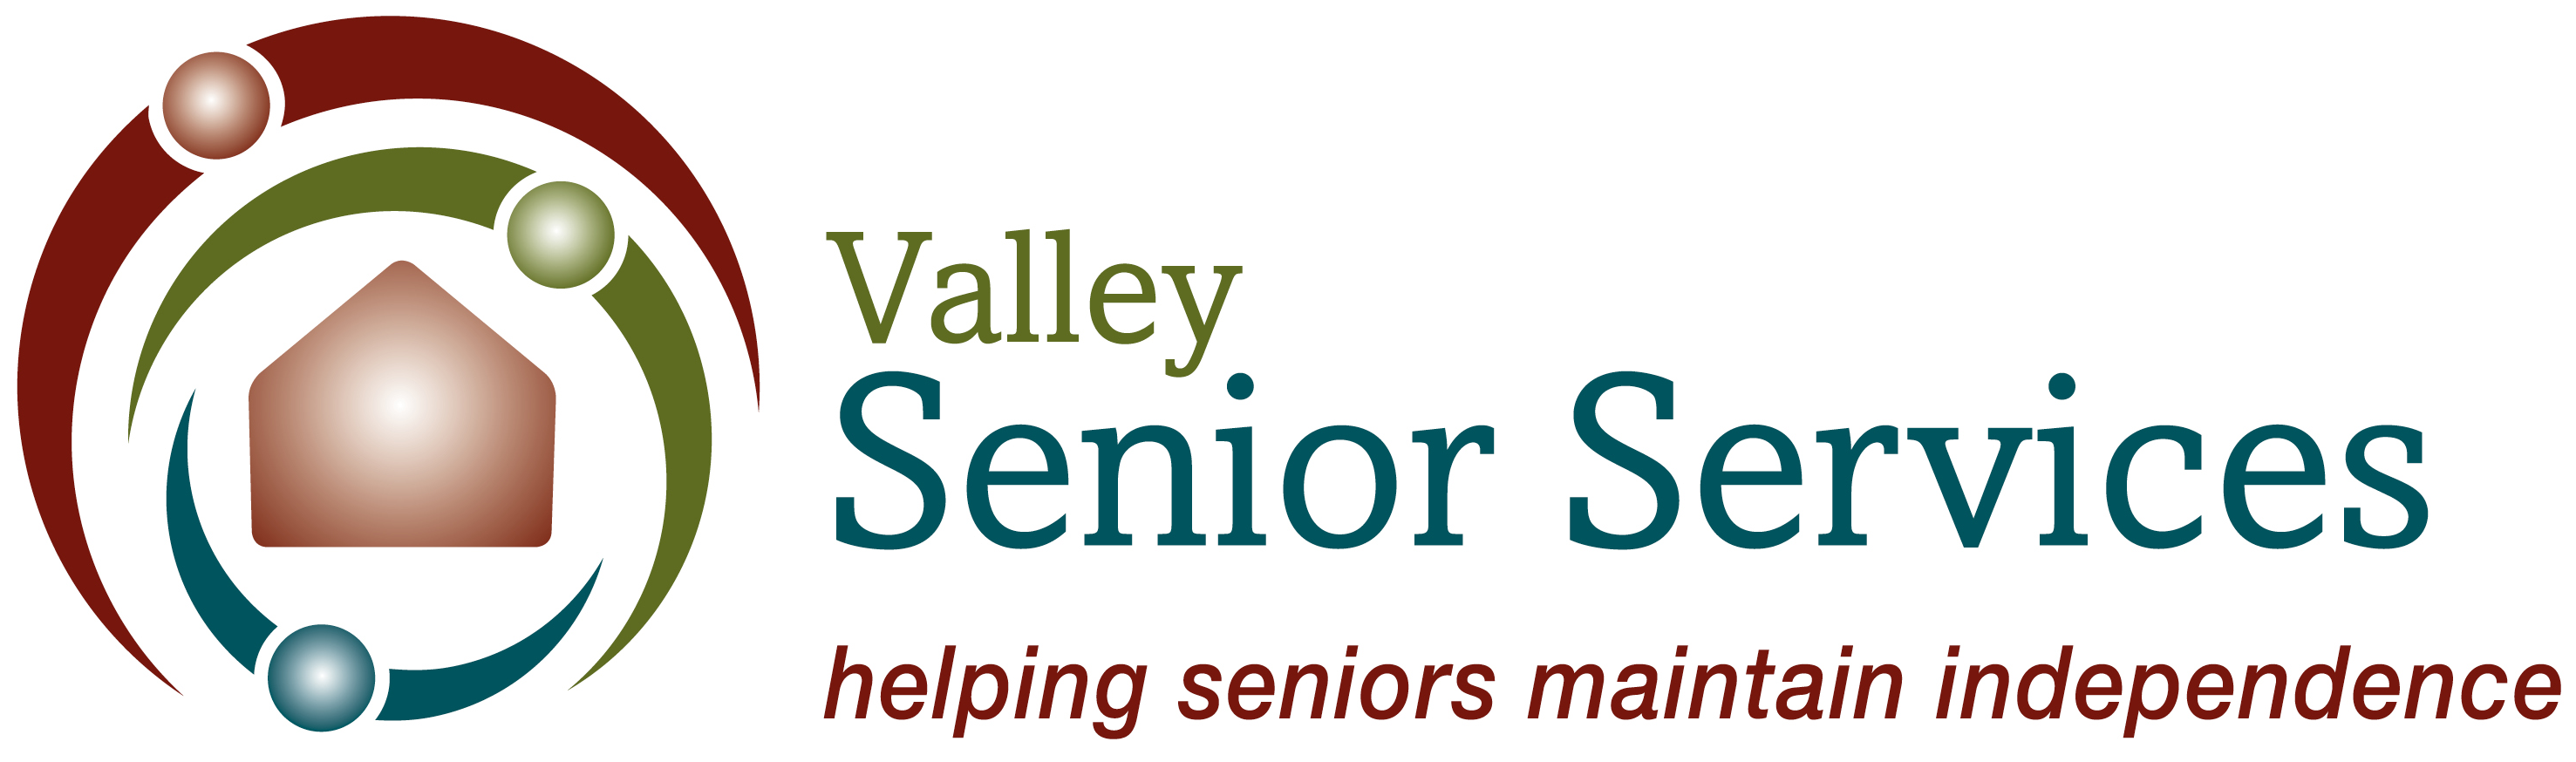 Valley Senior Services.png